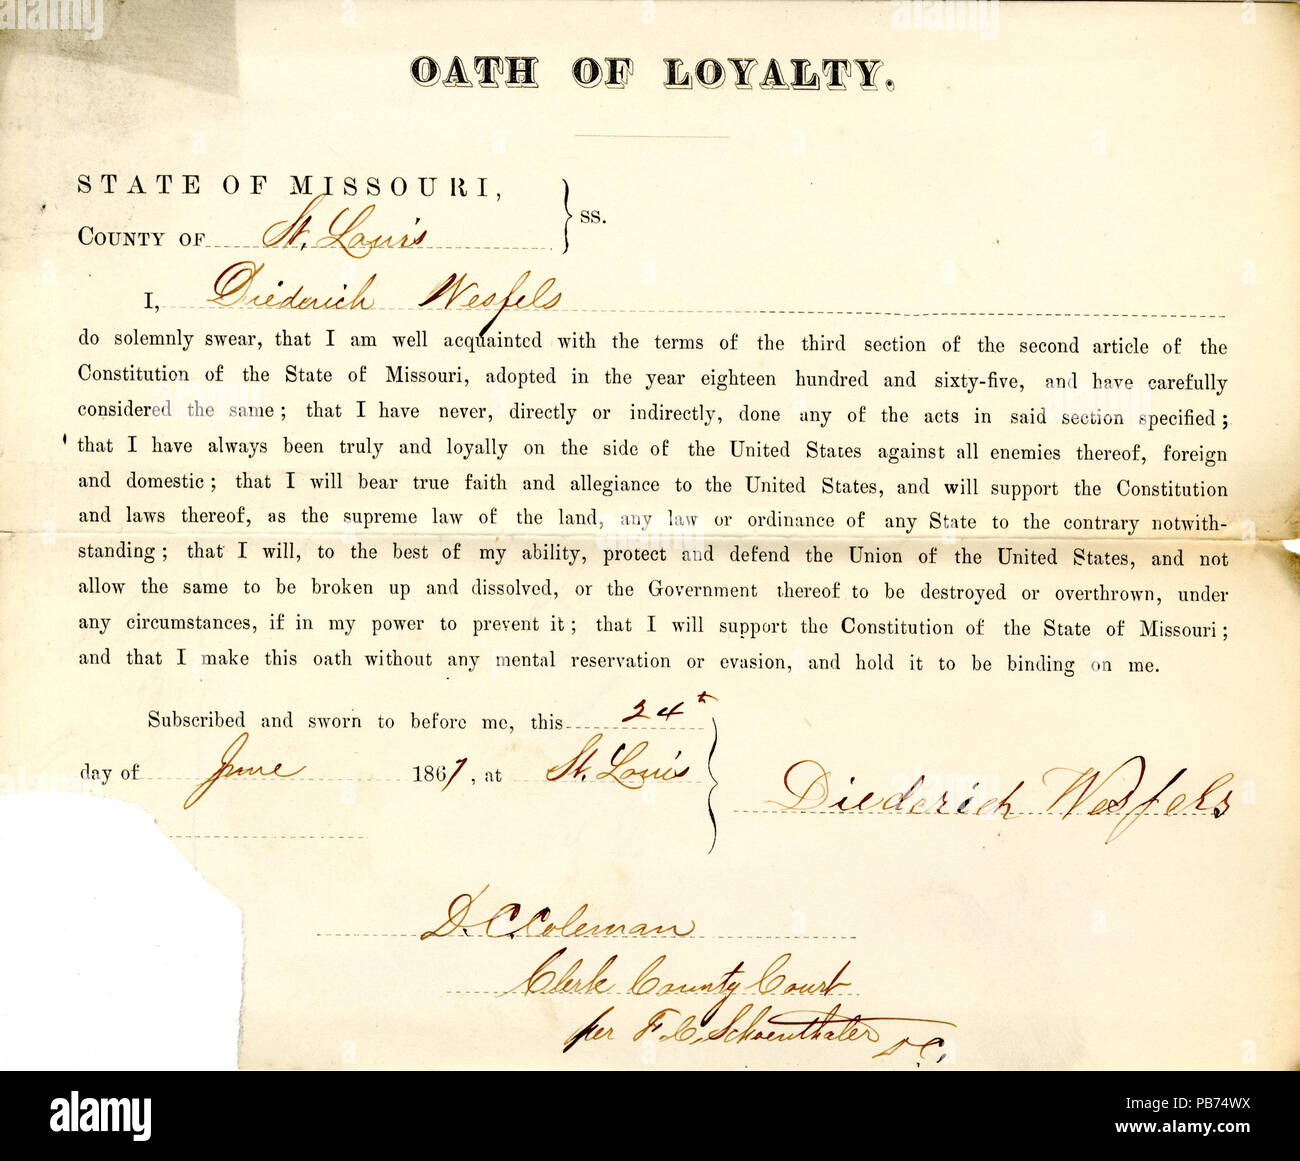 945 Loyalty oath of Diederich Wessels of Missouri, County of St. Louis Stock Photo